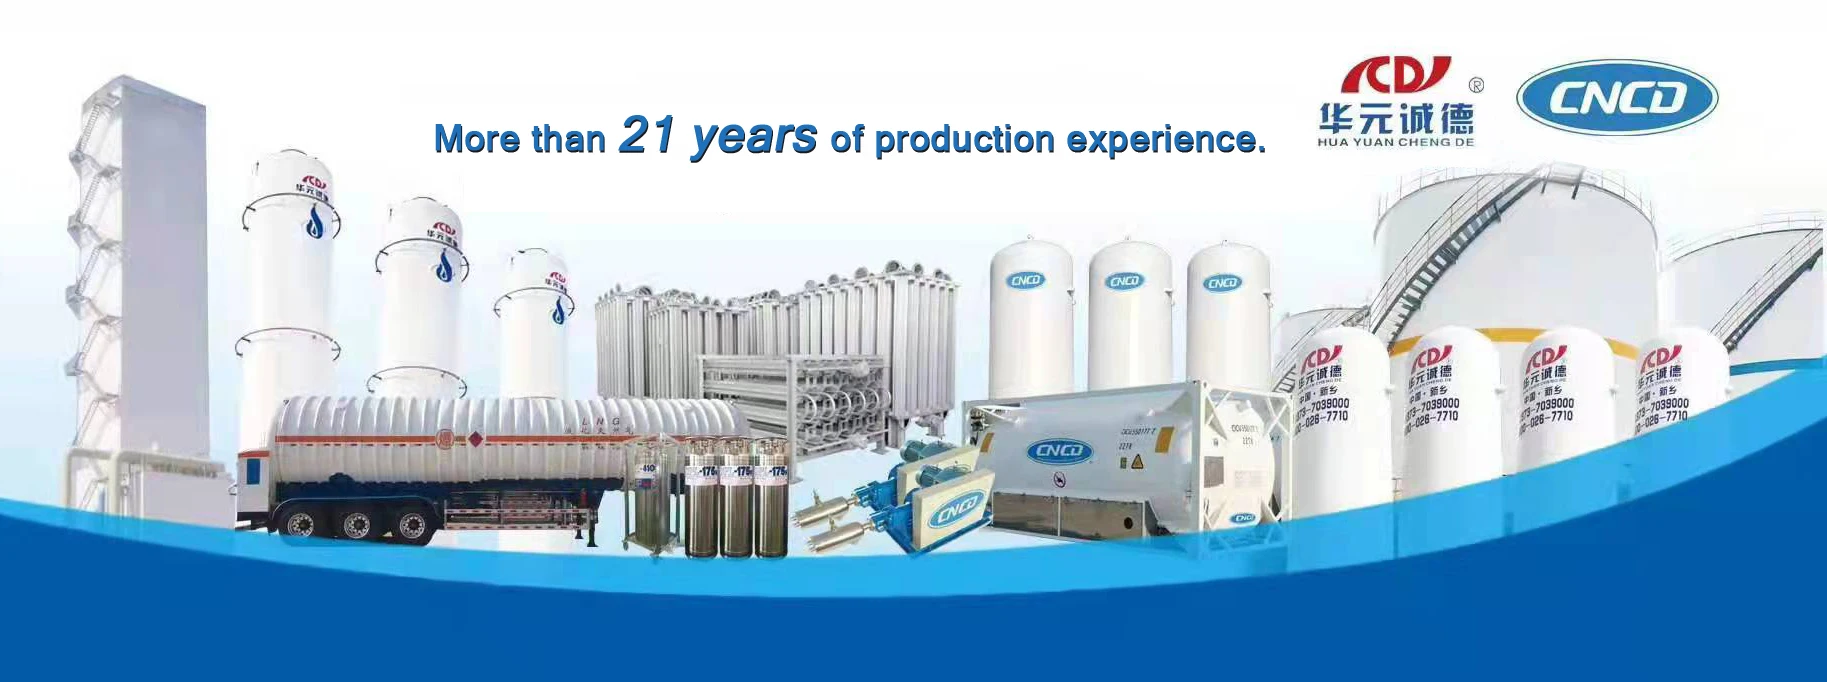 Cryogenic Conditioning Equipment Manufacturer